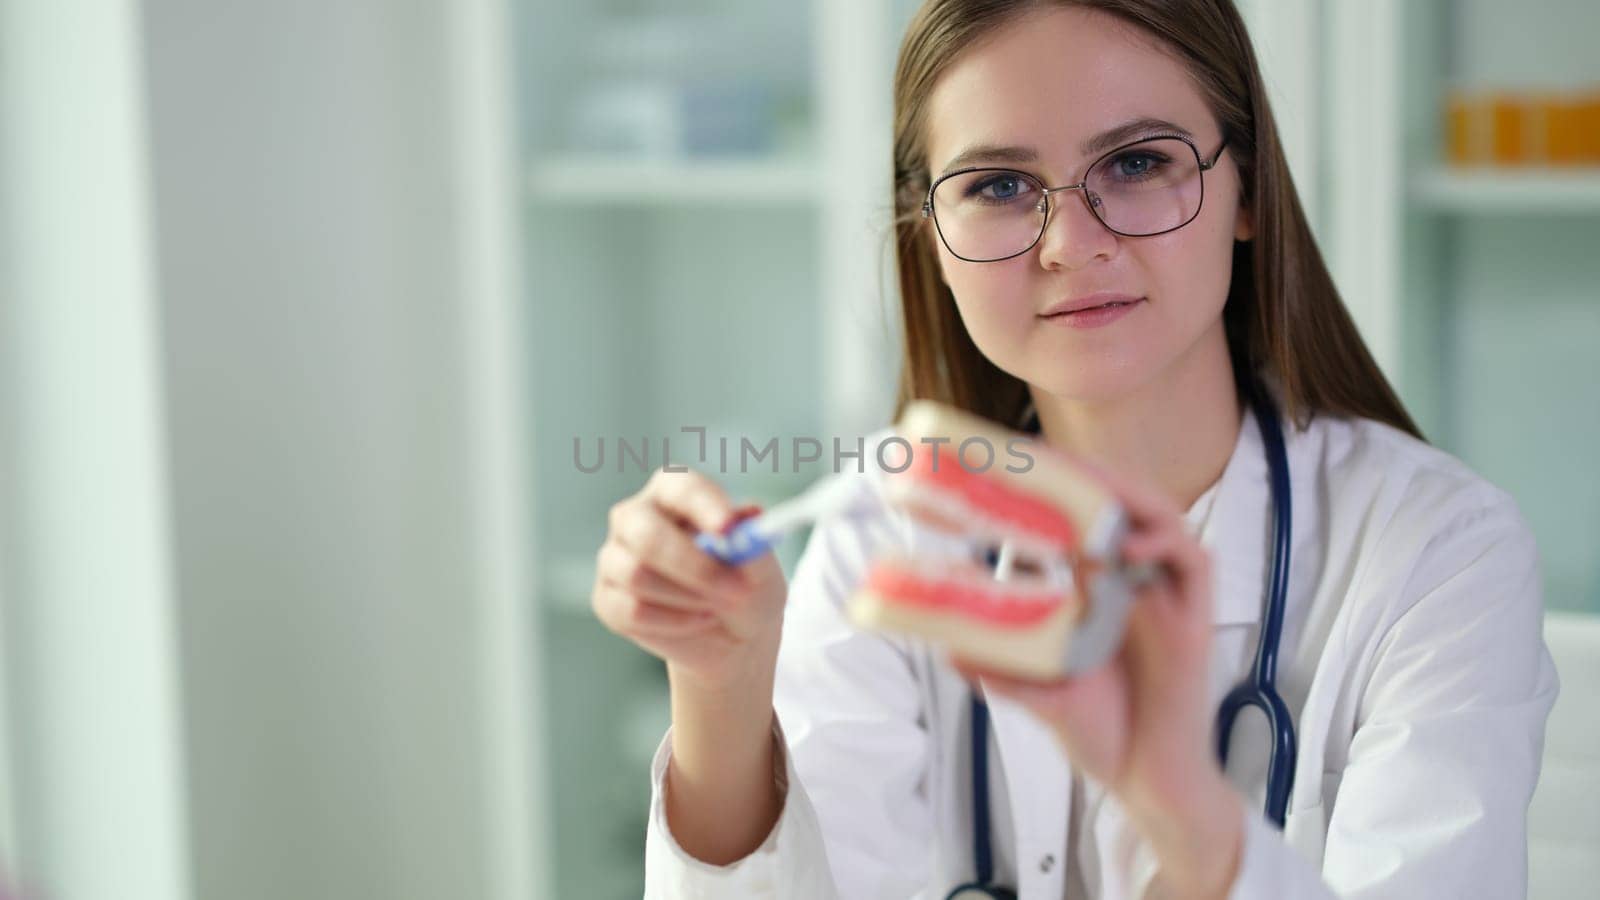 Woman dentist holds model of jaws and toothbrush in hands. Dentist shows how to brush teeth correctly